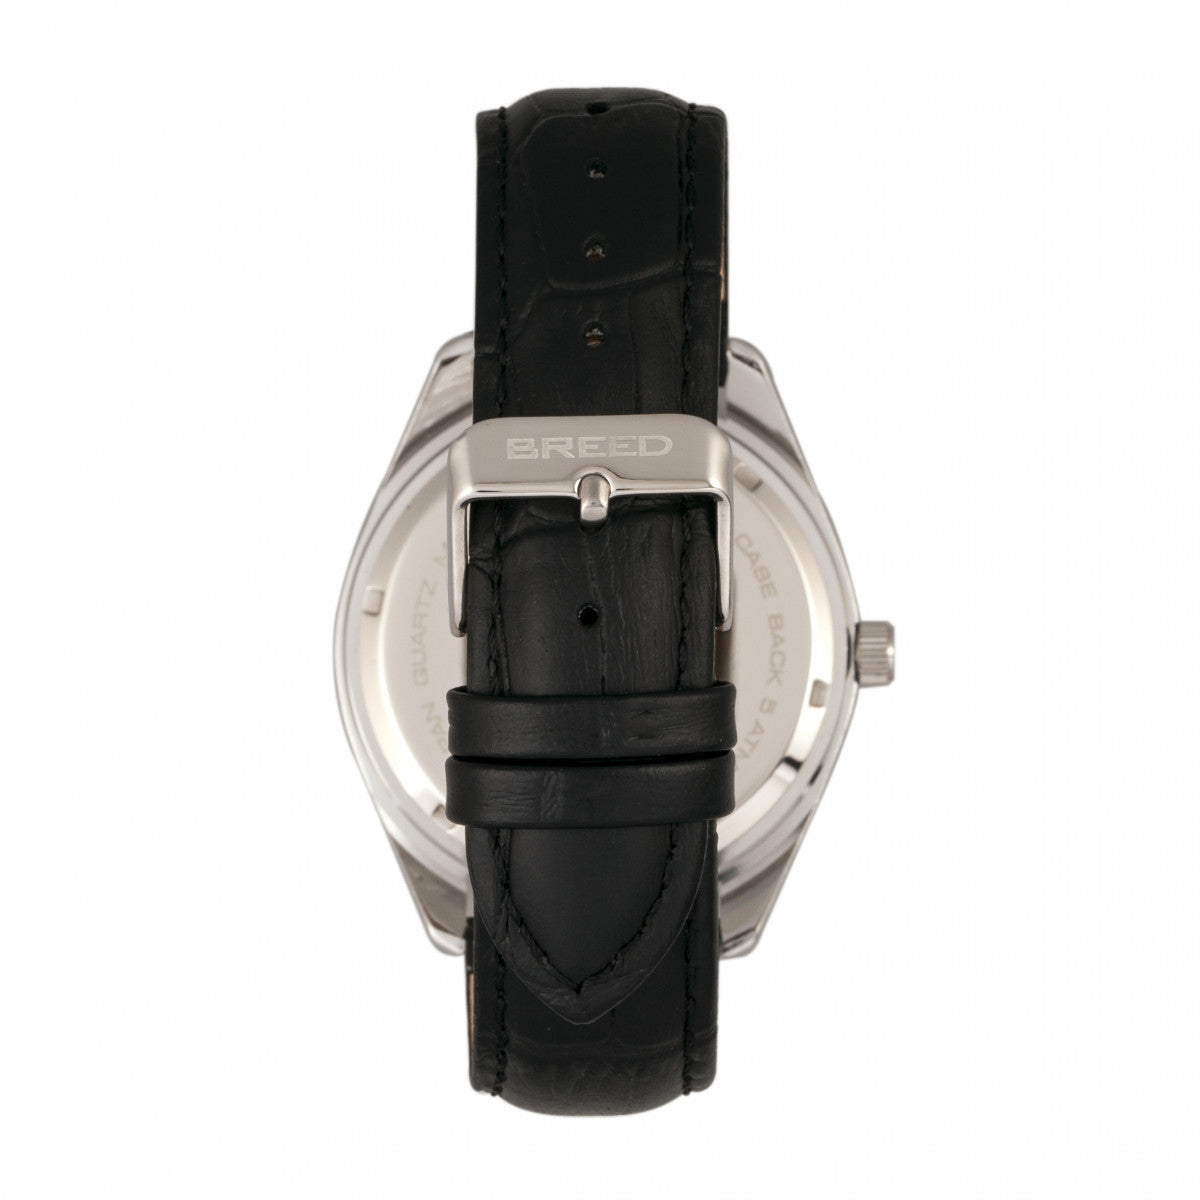 Breed Louis Leather-Band Watch w/Date - Silver/Black - BRD7902